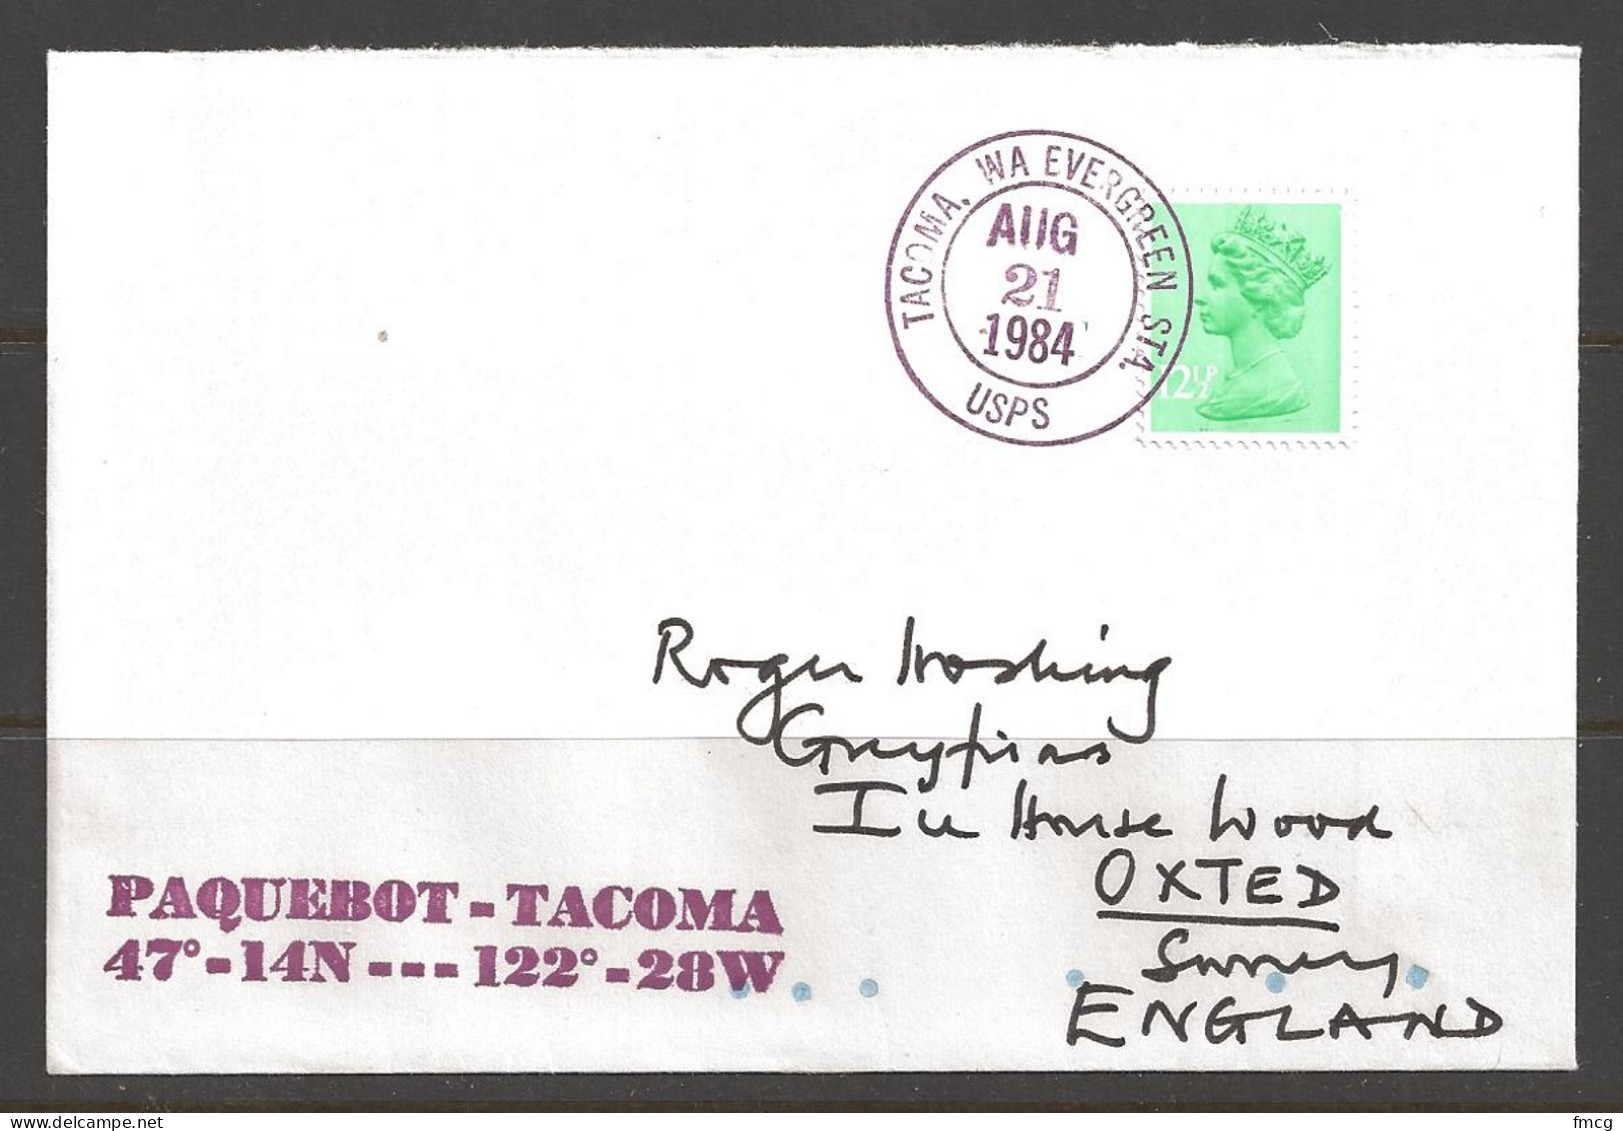 1984 Paquebot Cover, British Stamp Used In Tacoma Washington (Aug 21) - Covers & Documents